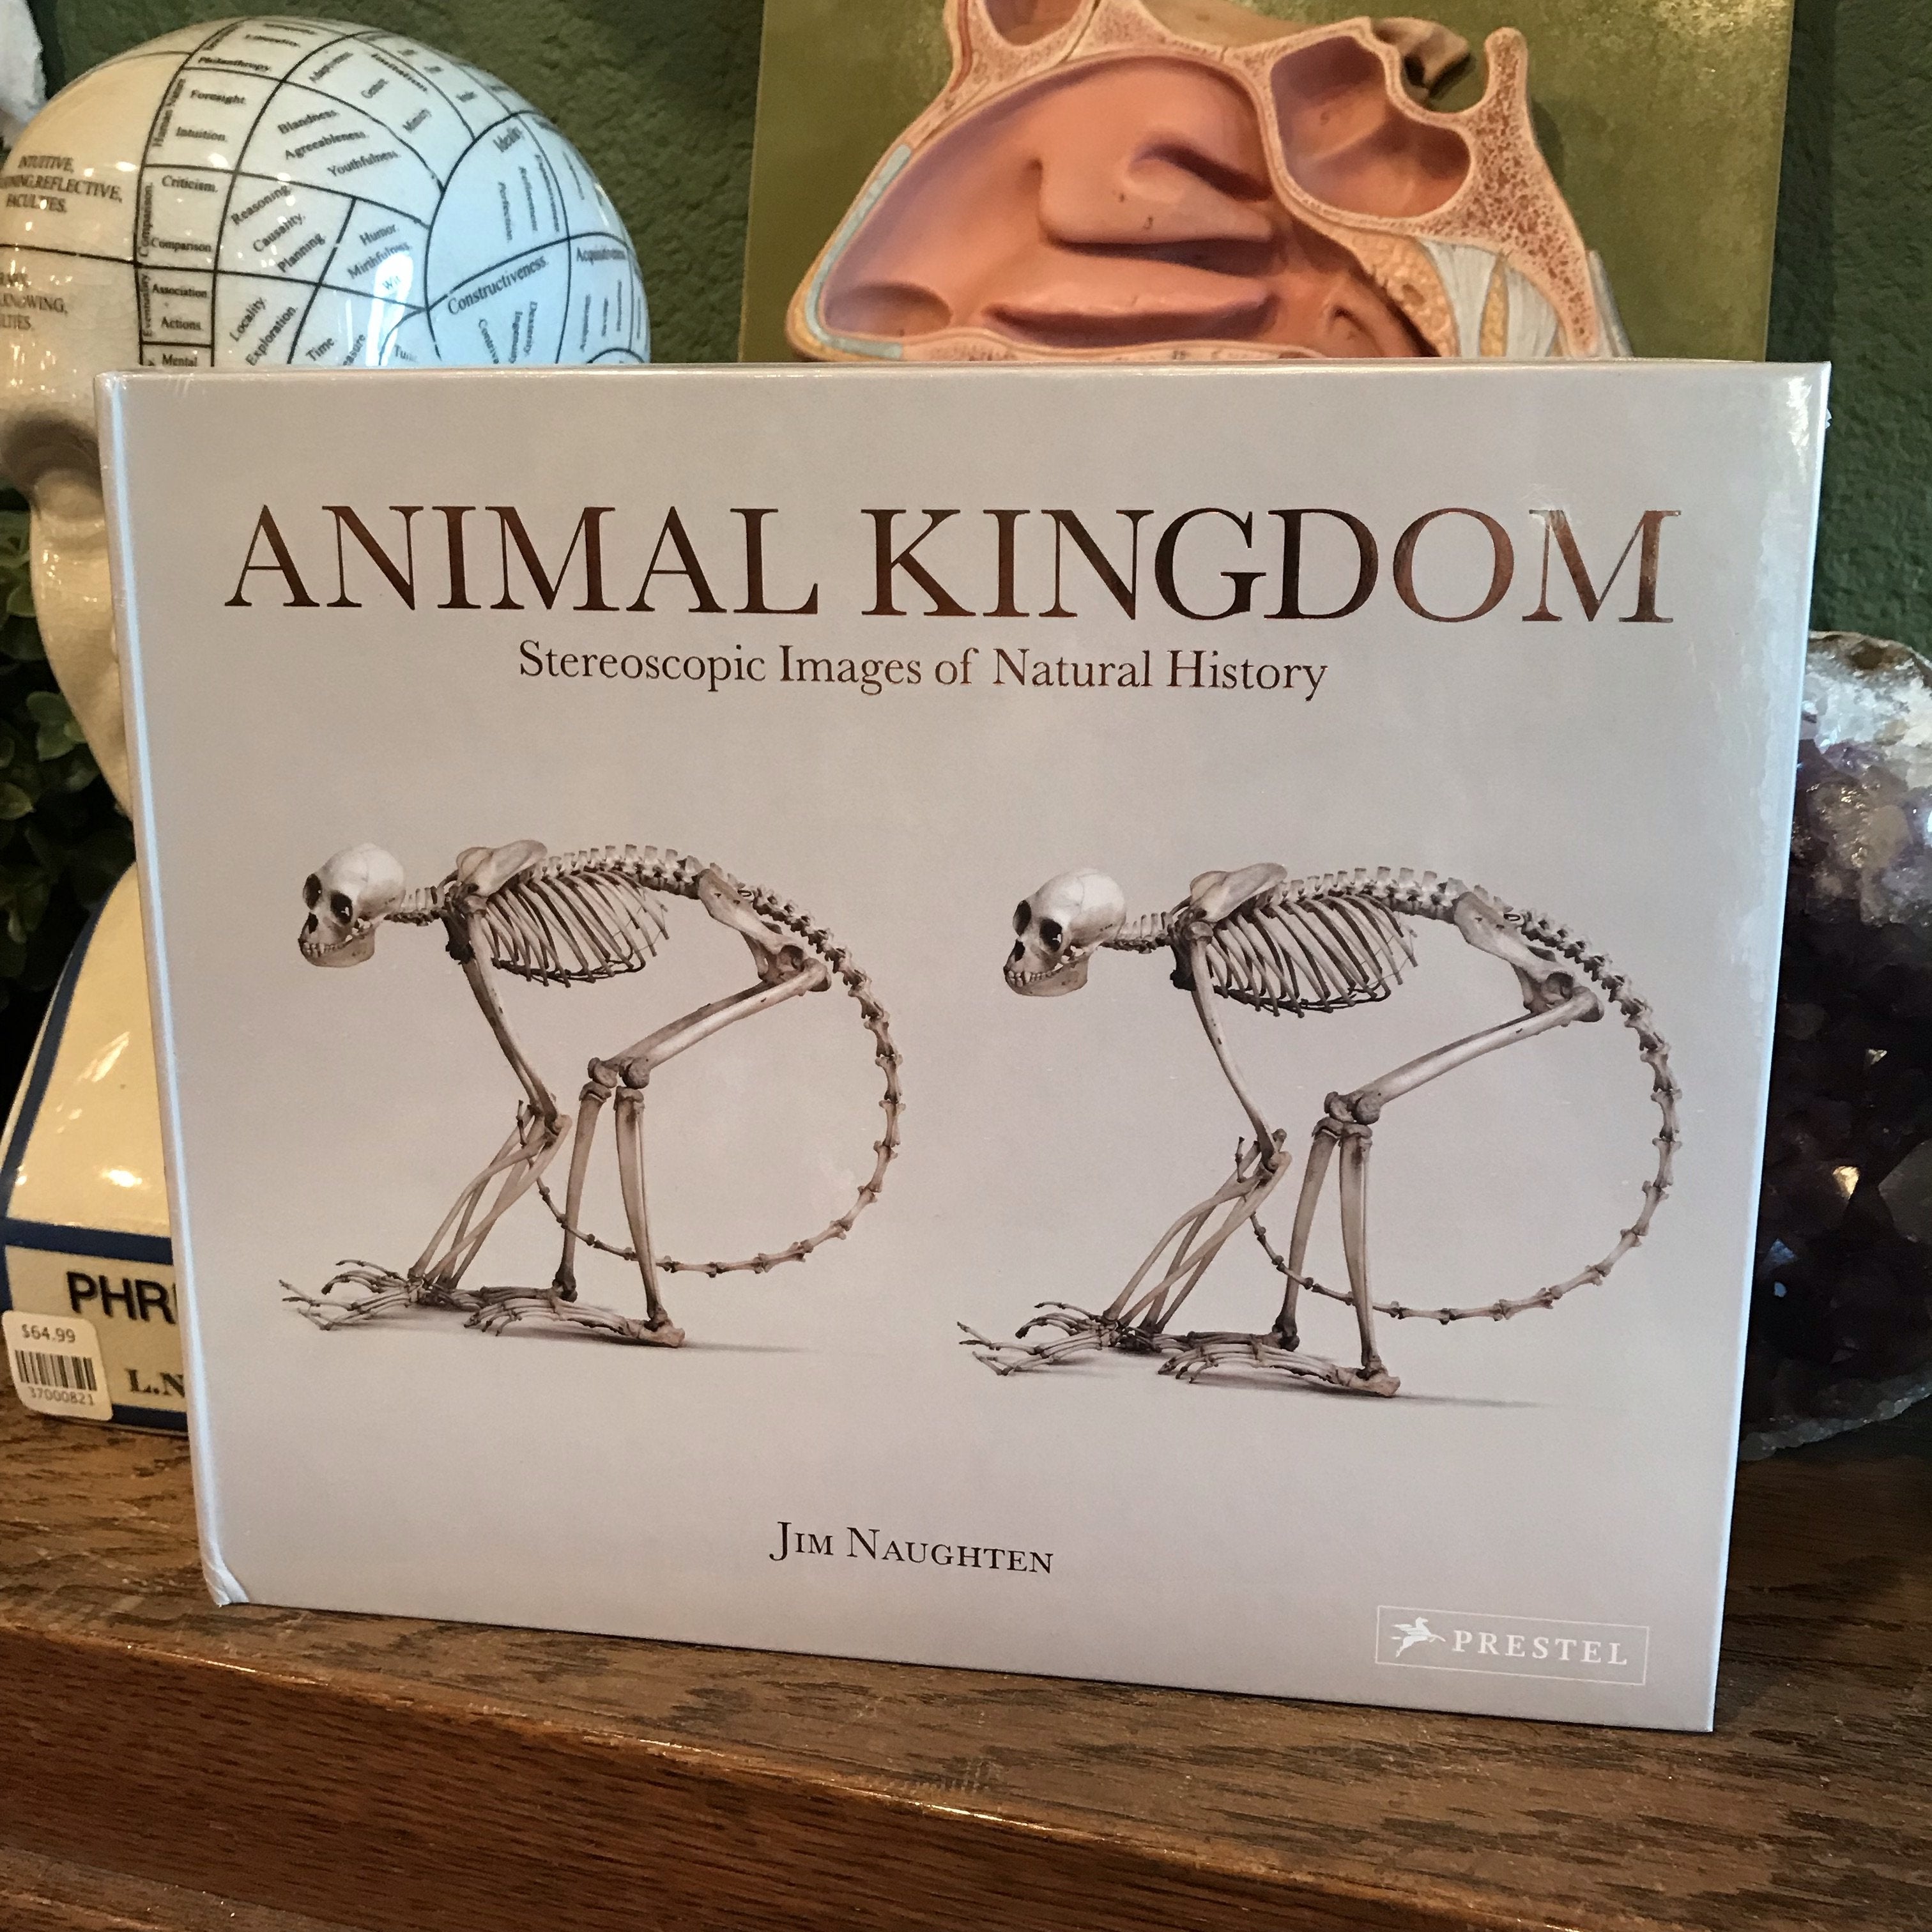 Animal Kingdom: Stereoscopic Images of Natural History by Jim Naughten